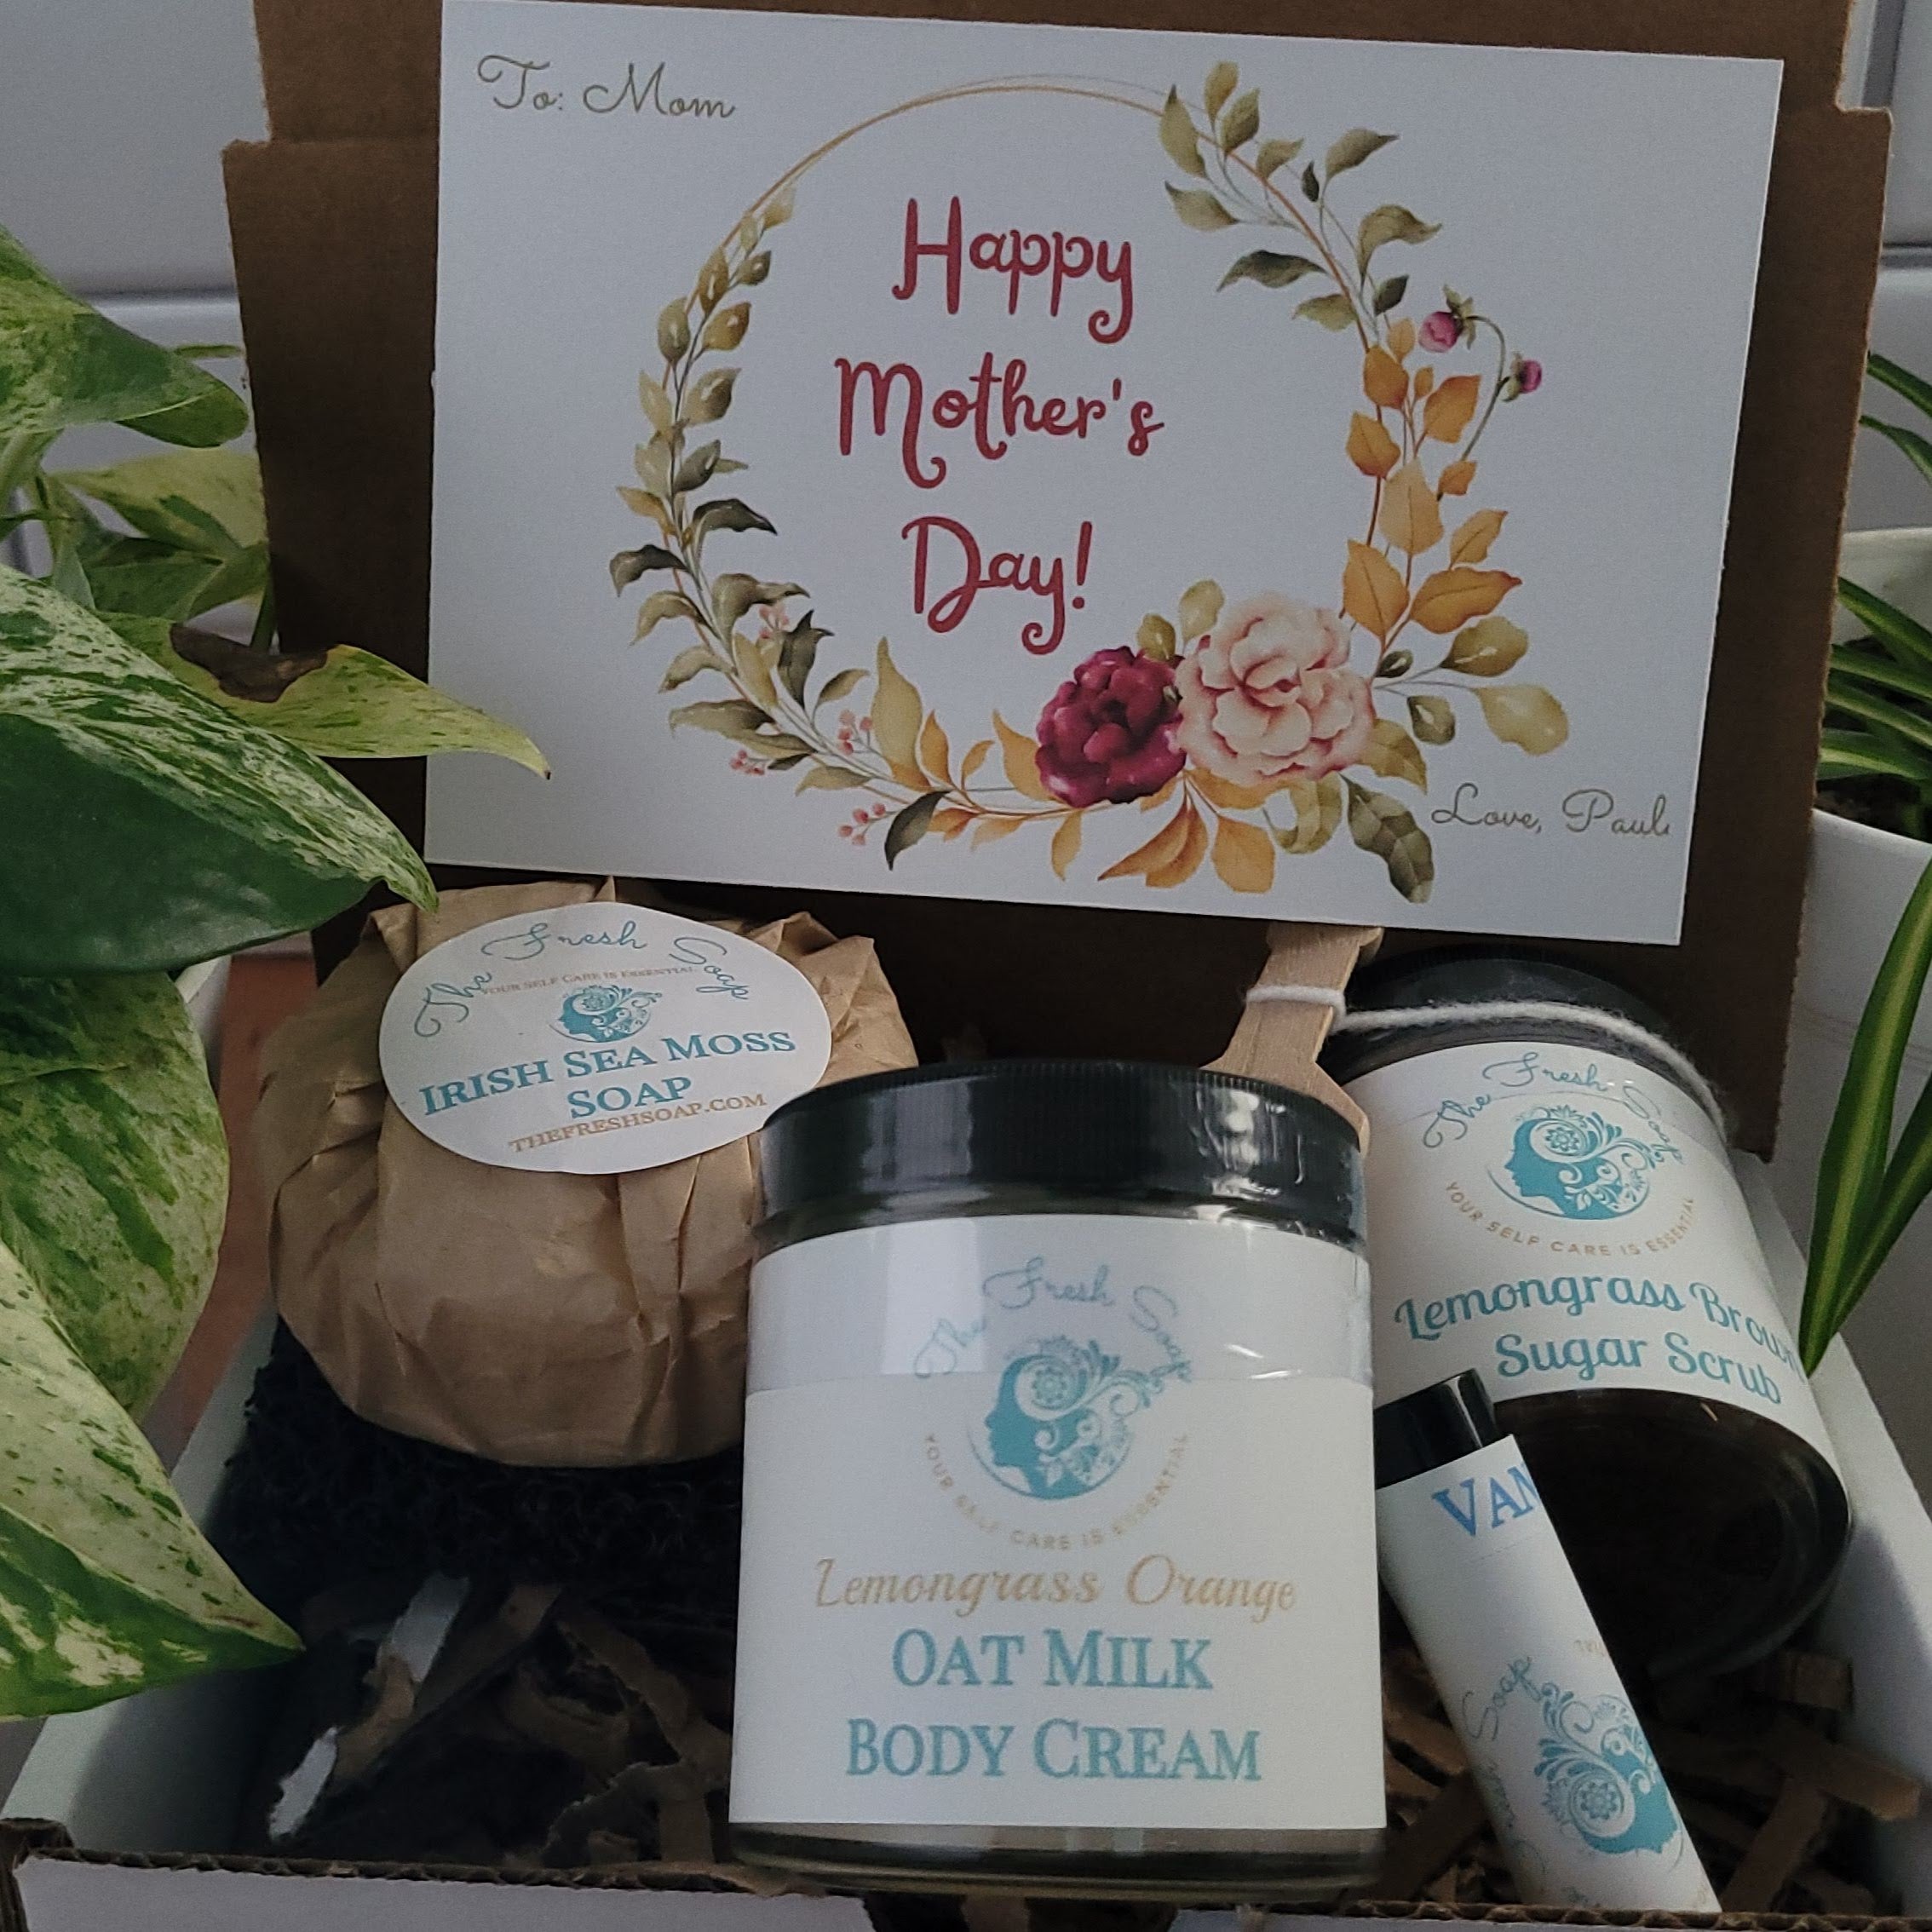 Mother's Day Personalized Pamper Kit: Gift/Send Mother's Day Gifts Online  JVS1205489 |IGP.com